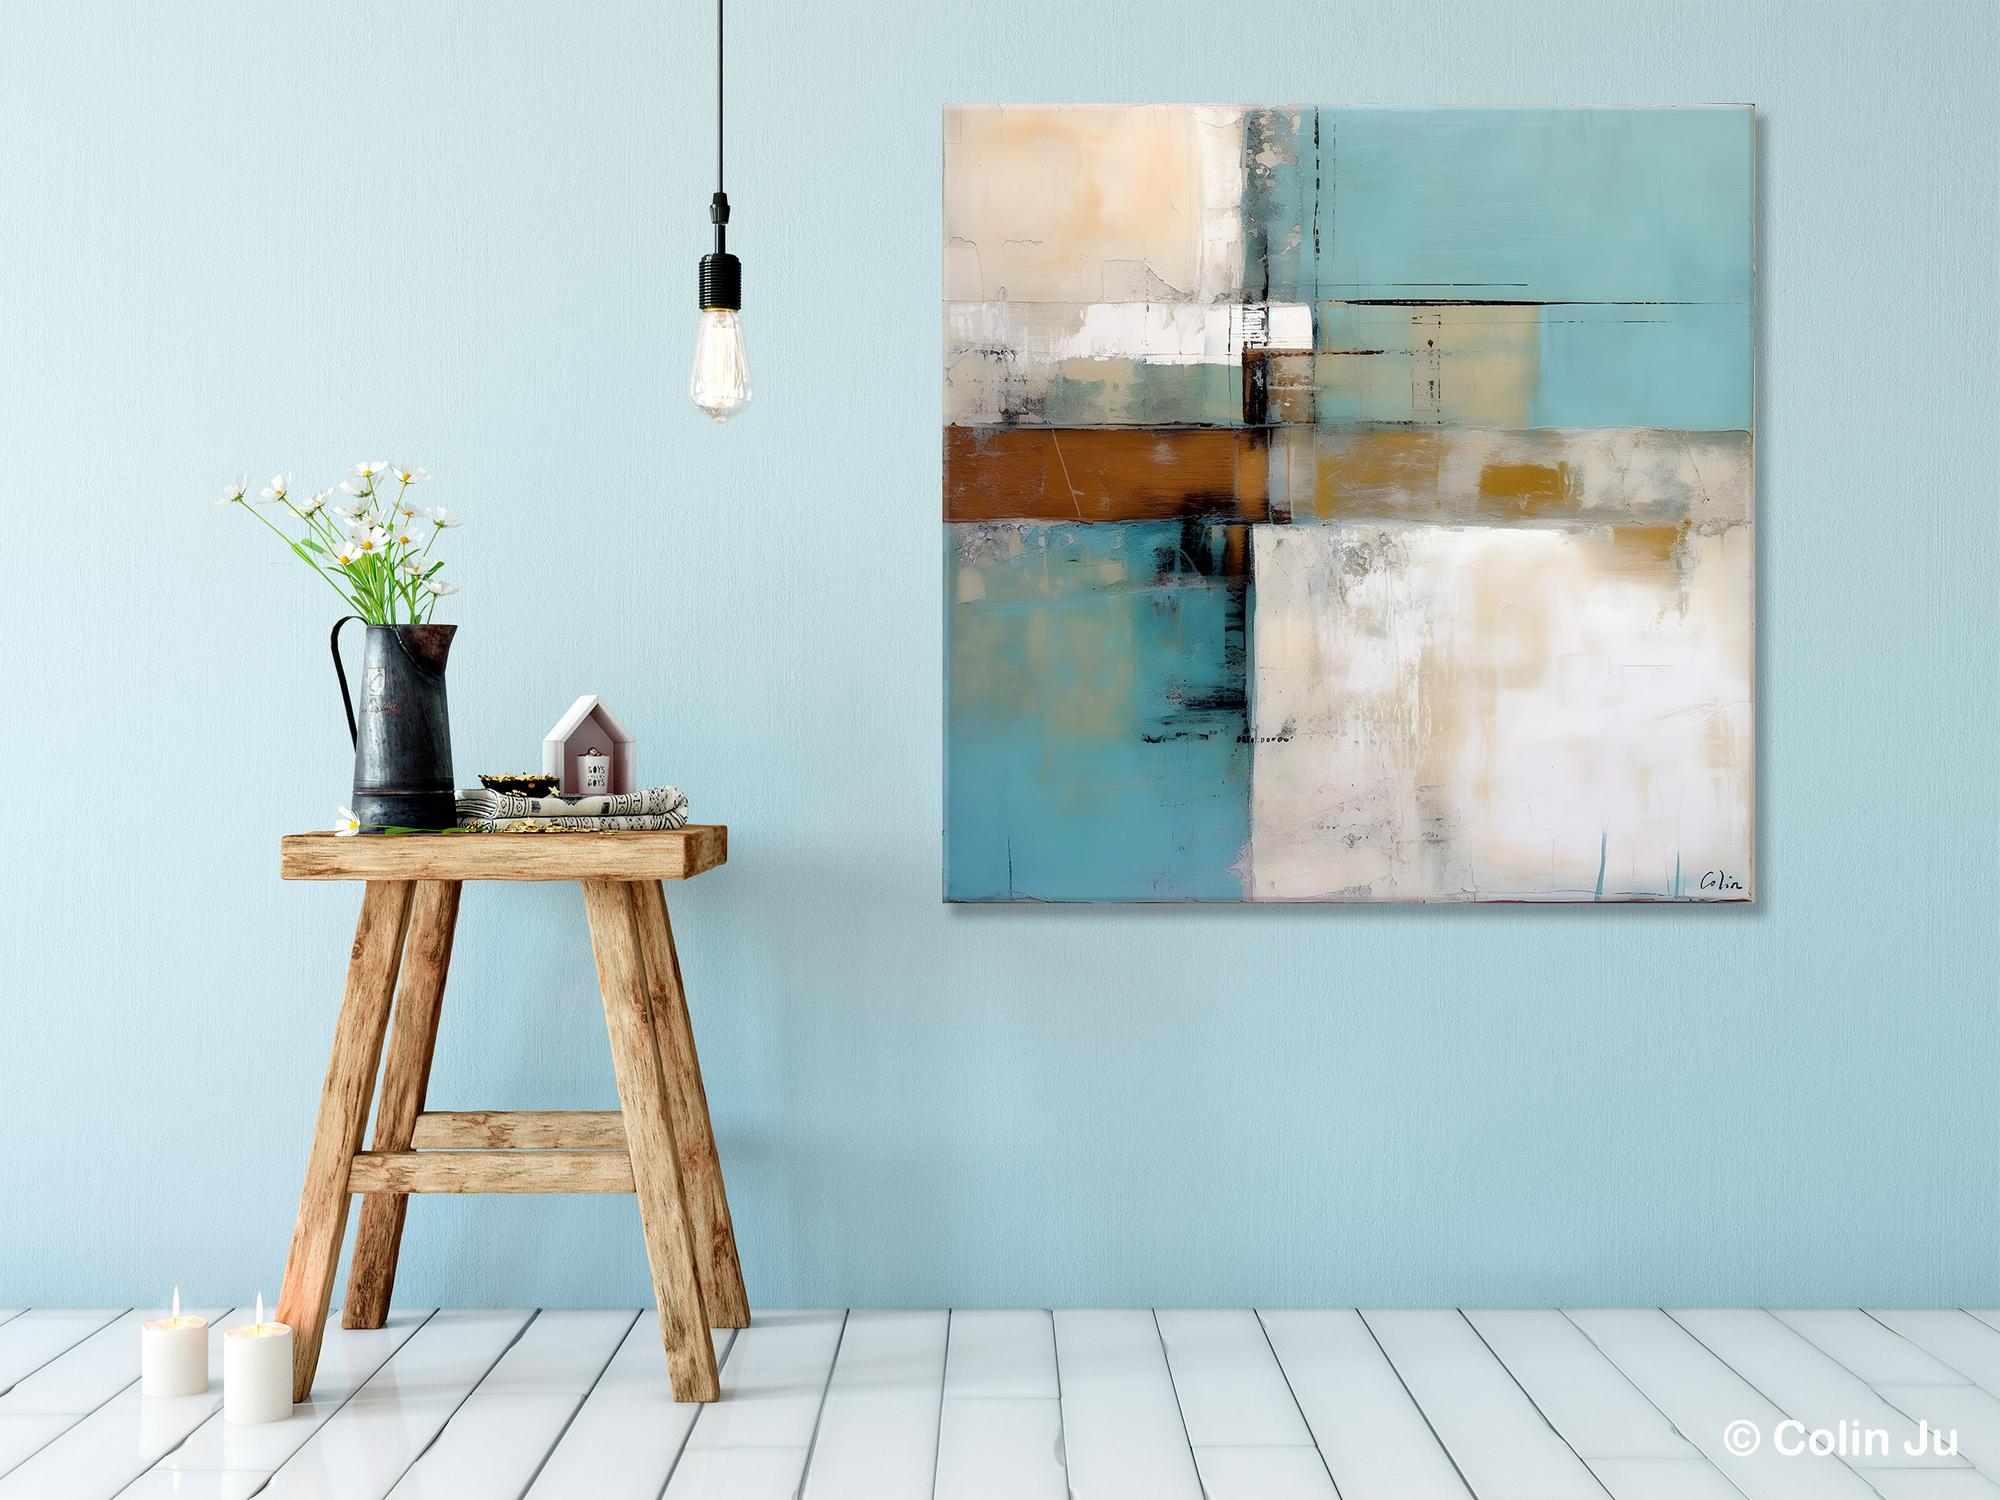 Extra Large Painting on Canvas, Contemporary Acrylic Paintings, Large Original Abstract Wall Art, Large Canvas Paintings for Bedroom-Paintingforhome